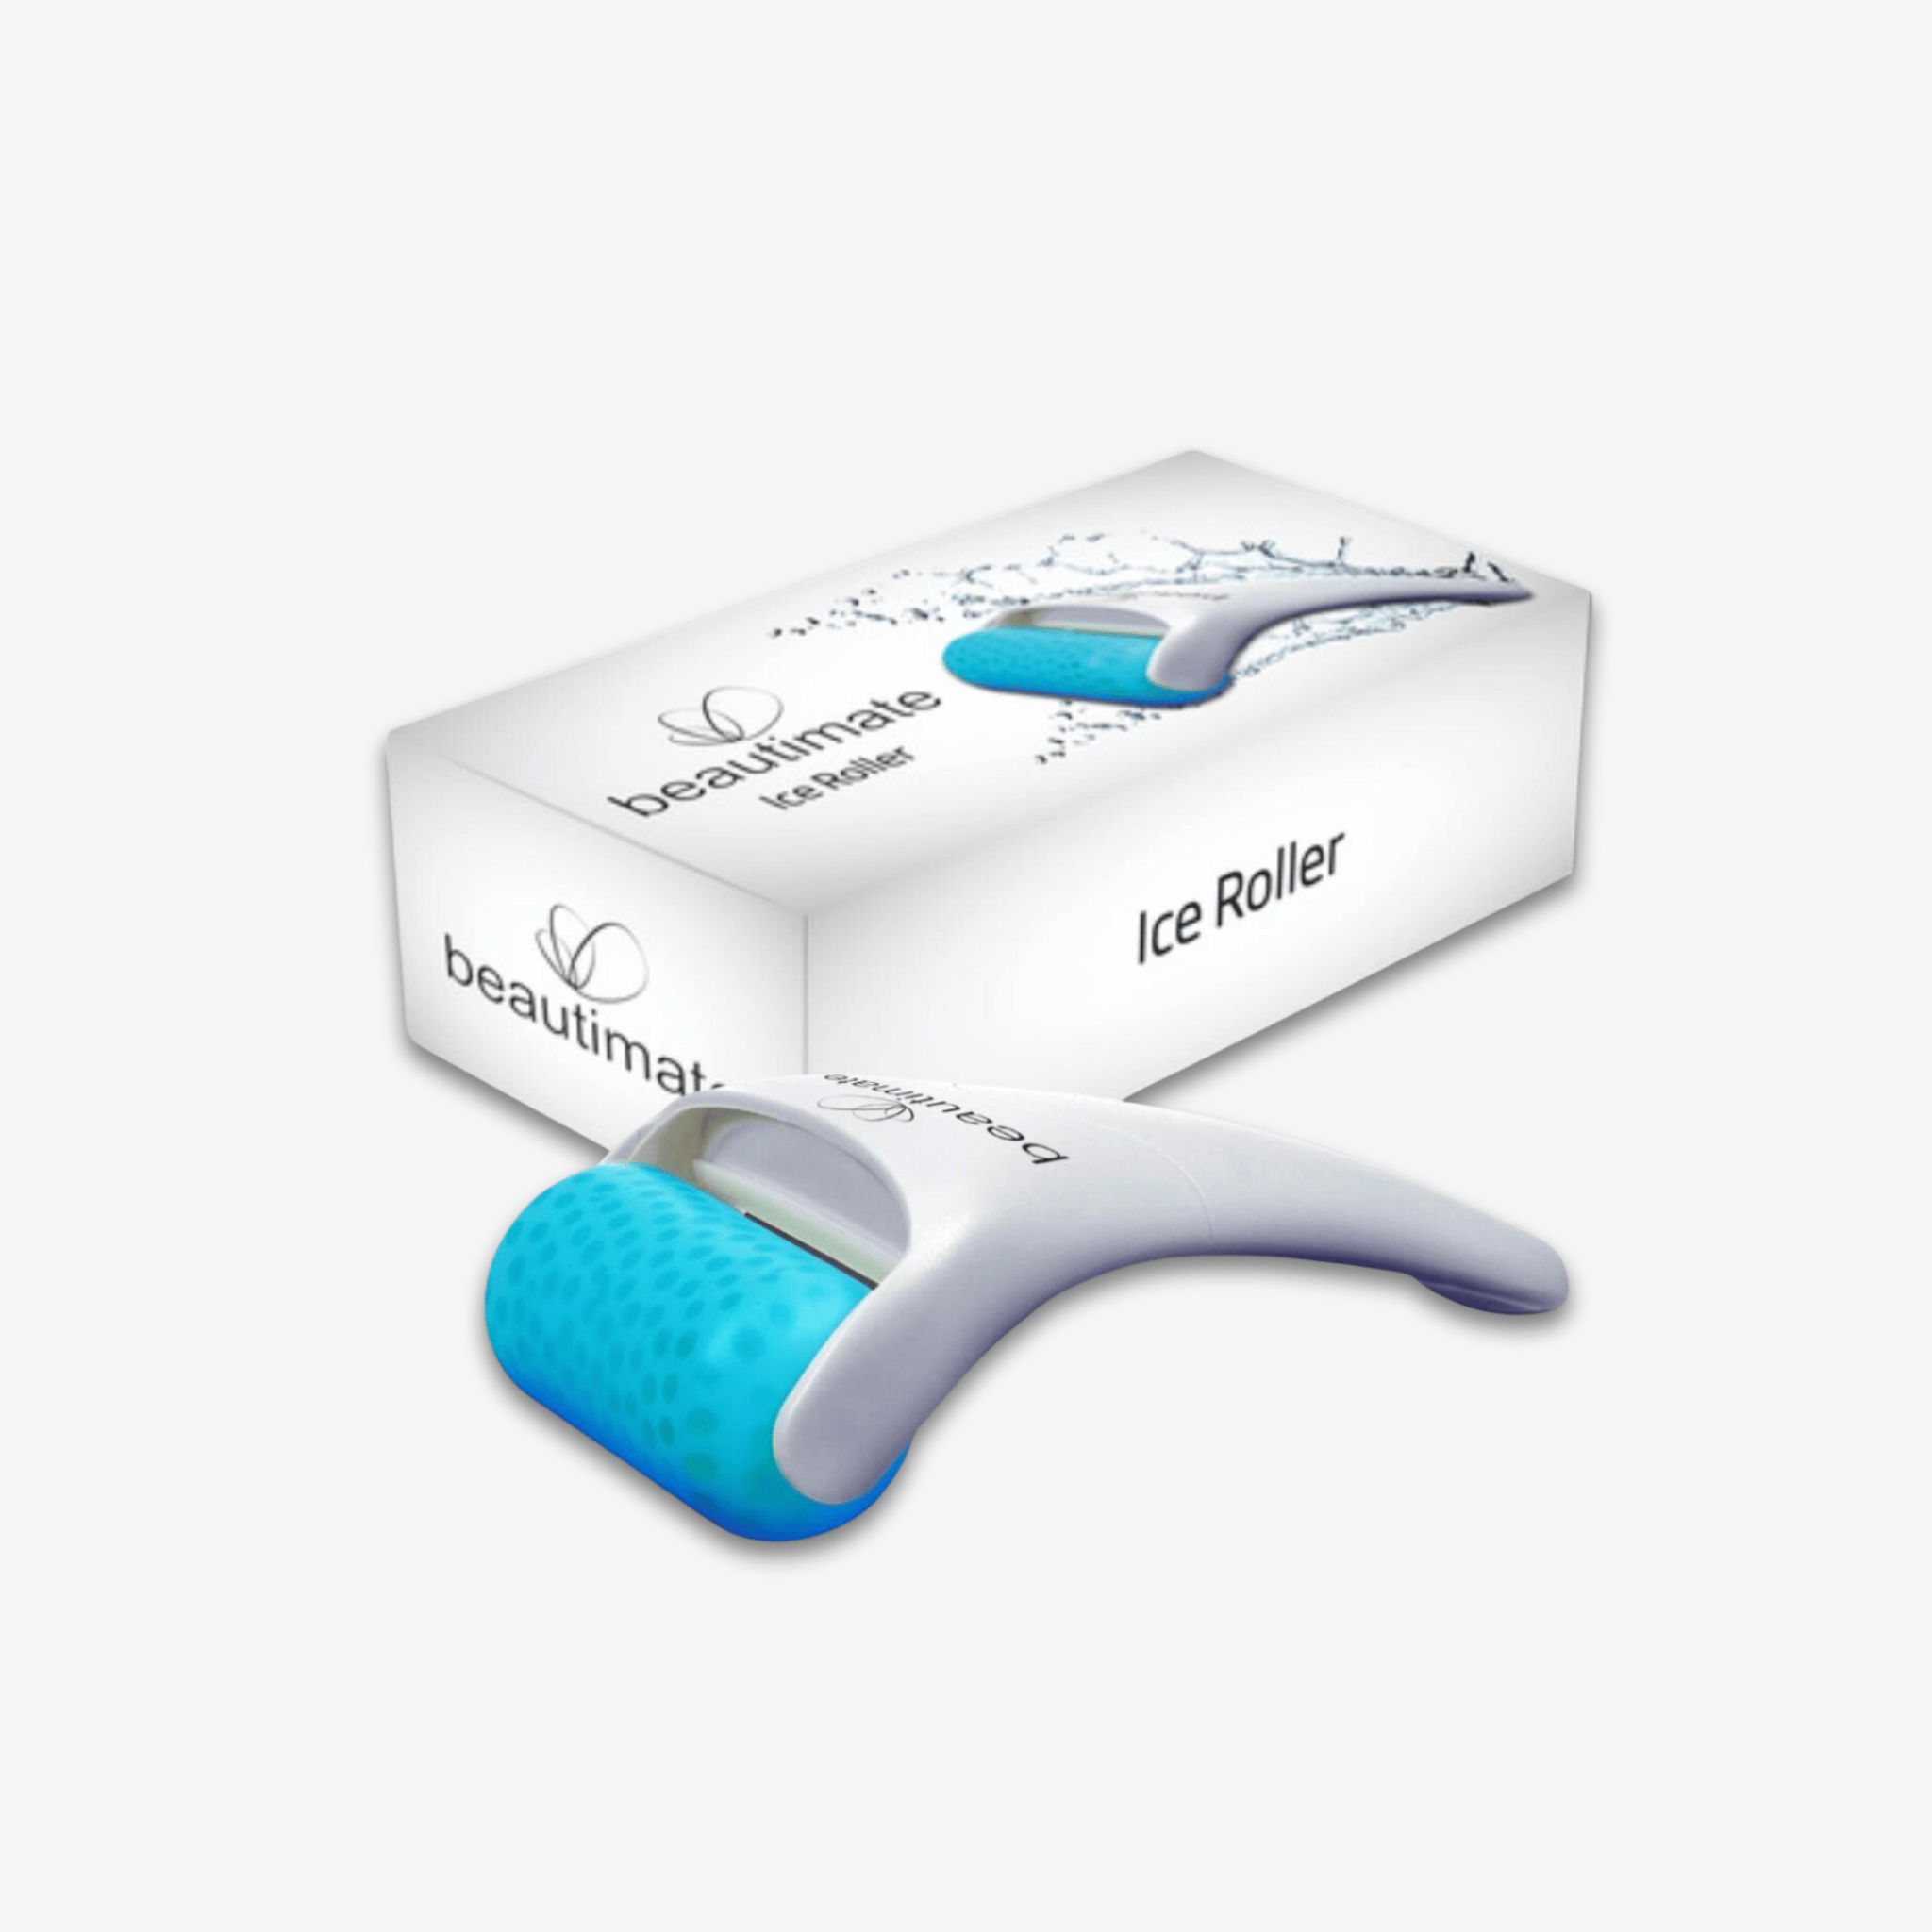 Ice Roller Depuffing Tool - Refresh Your Skin - beautimate